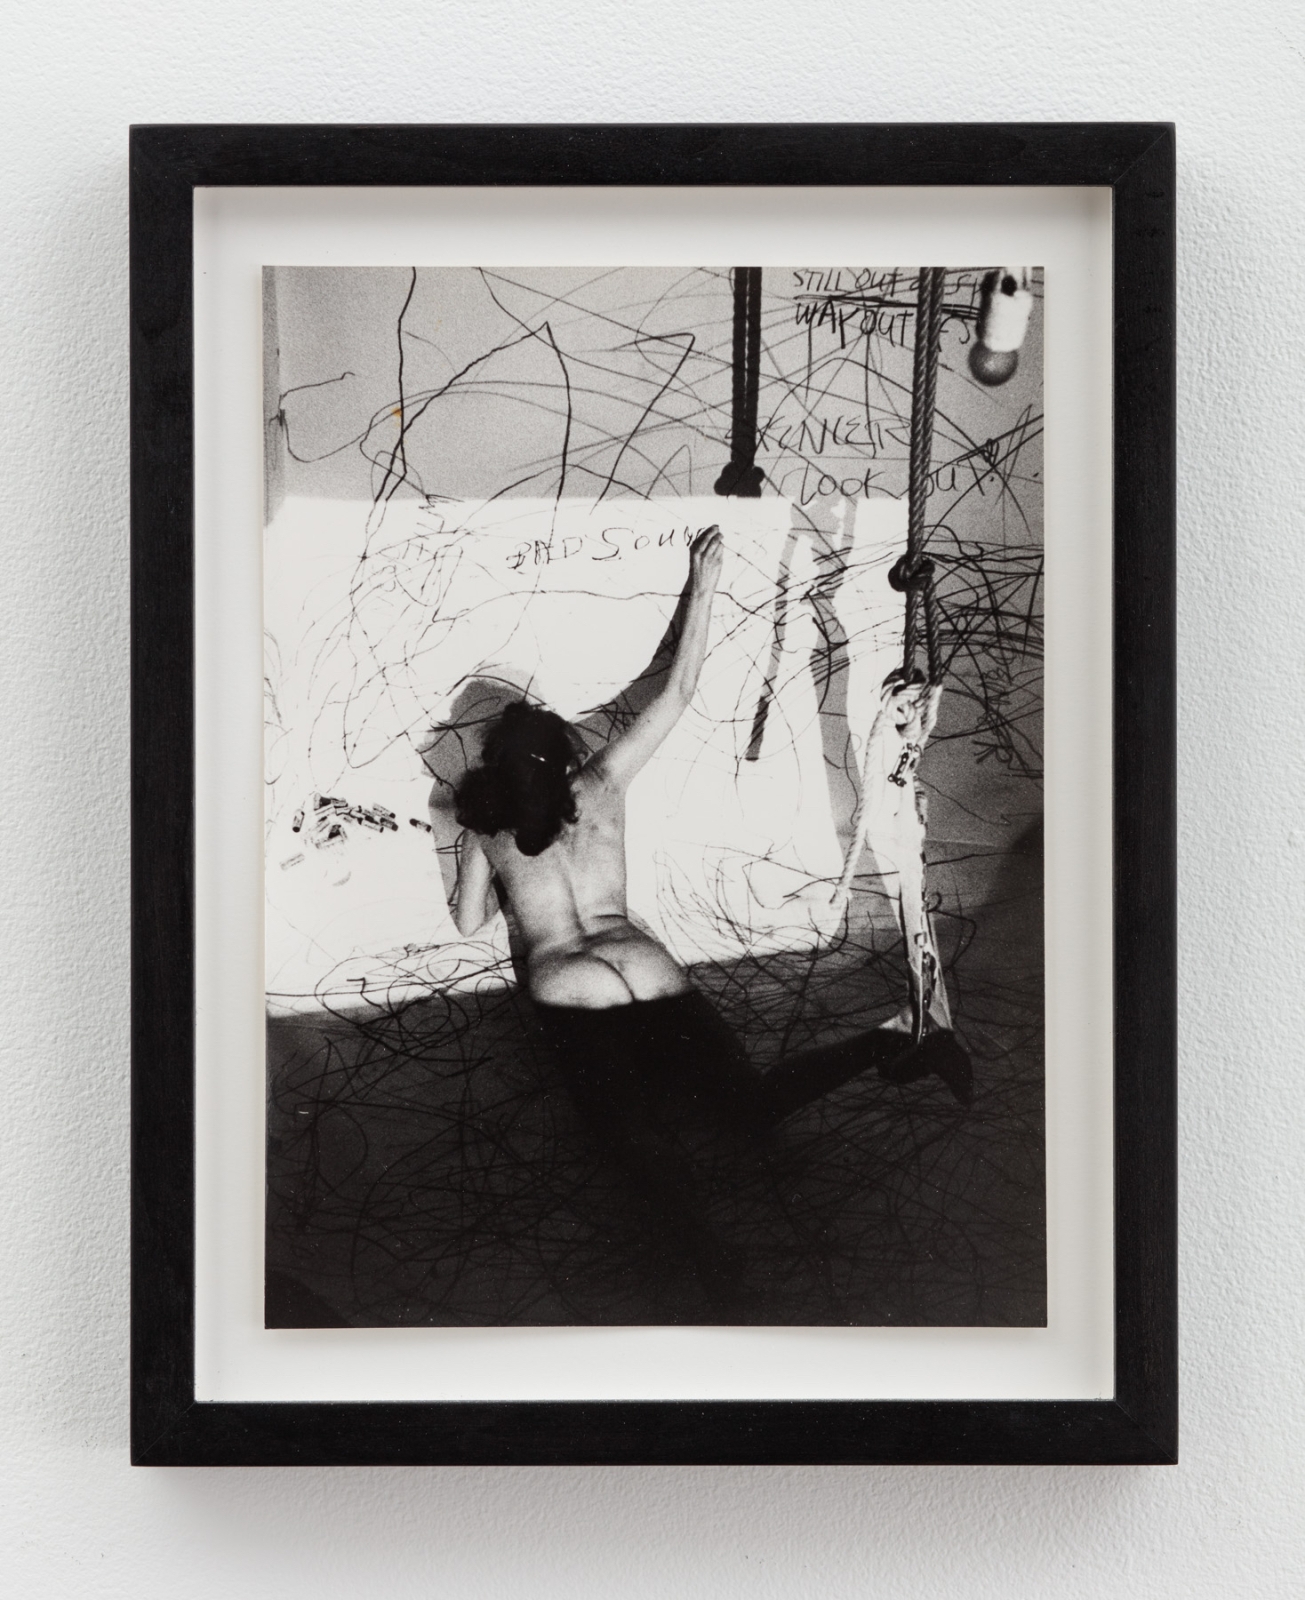 Carolee Schneemann
Up to and Including Her Limits (Studiogalerie Berlin), 1976
Signed and dated verso
silver gelatin print
9 1/4 x 6 3/4 in.
23.5 x 17.15 cm